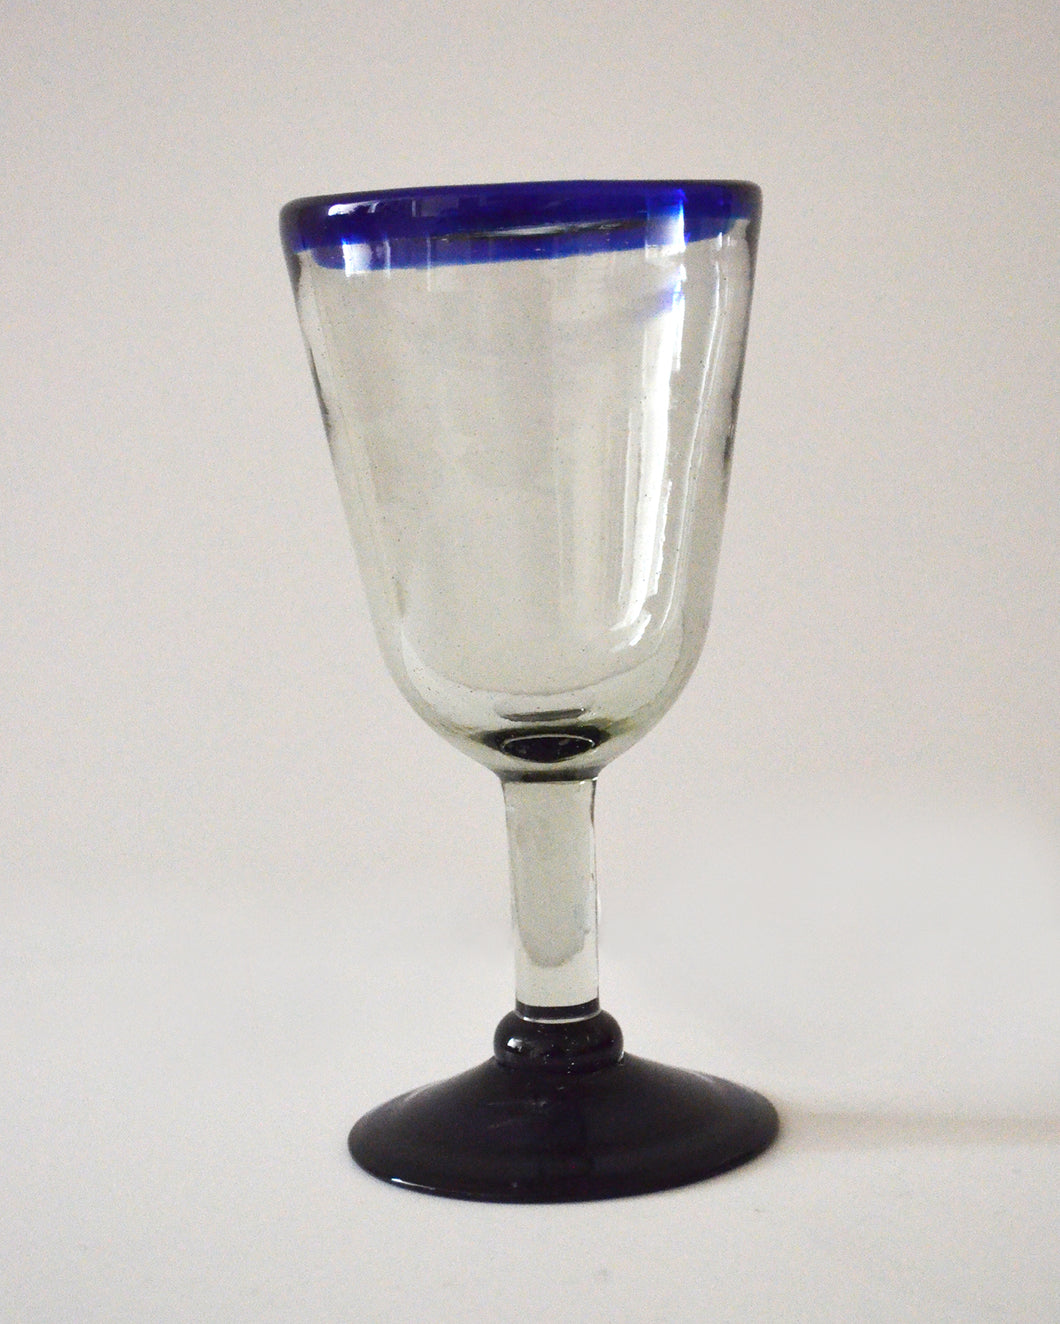 Hand blown wine glass with a blue rim